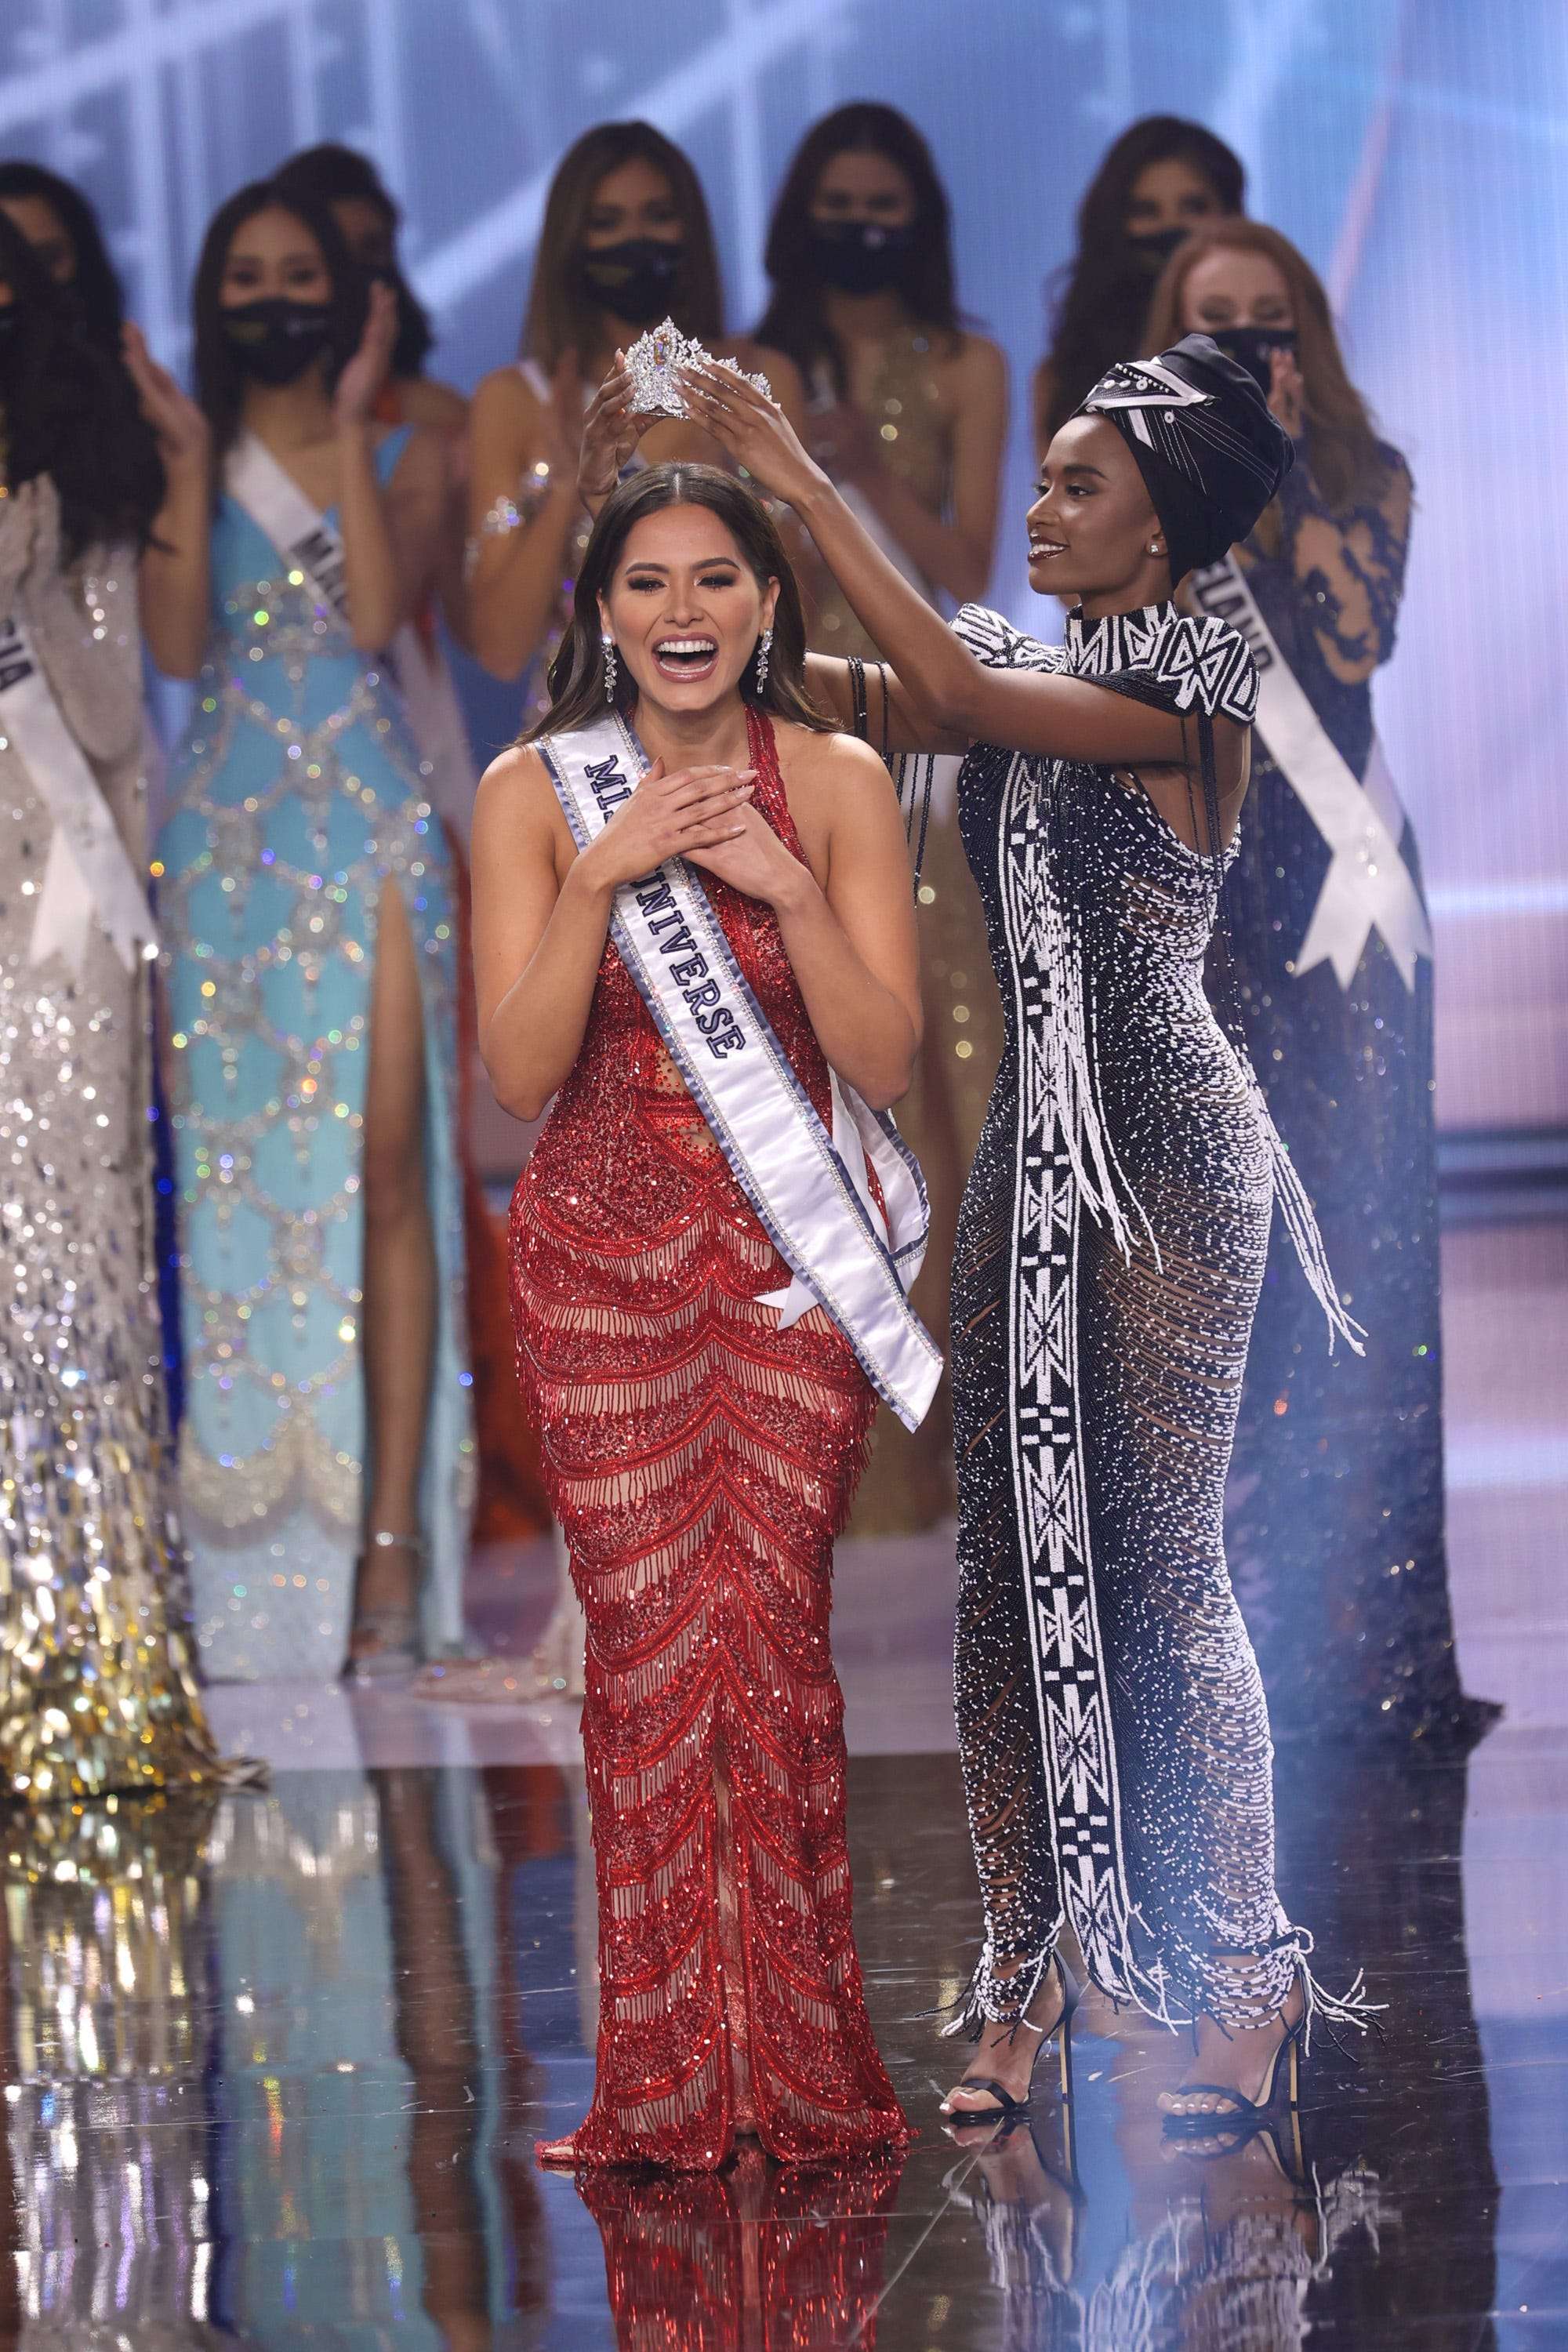 Newlycrowned Miss Universe Andrea Meza helped Miss Peru get into her